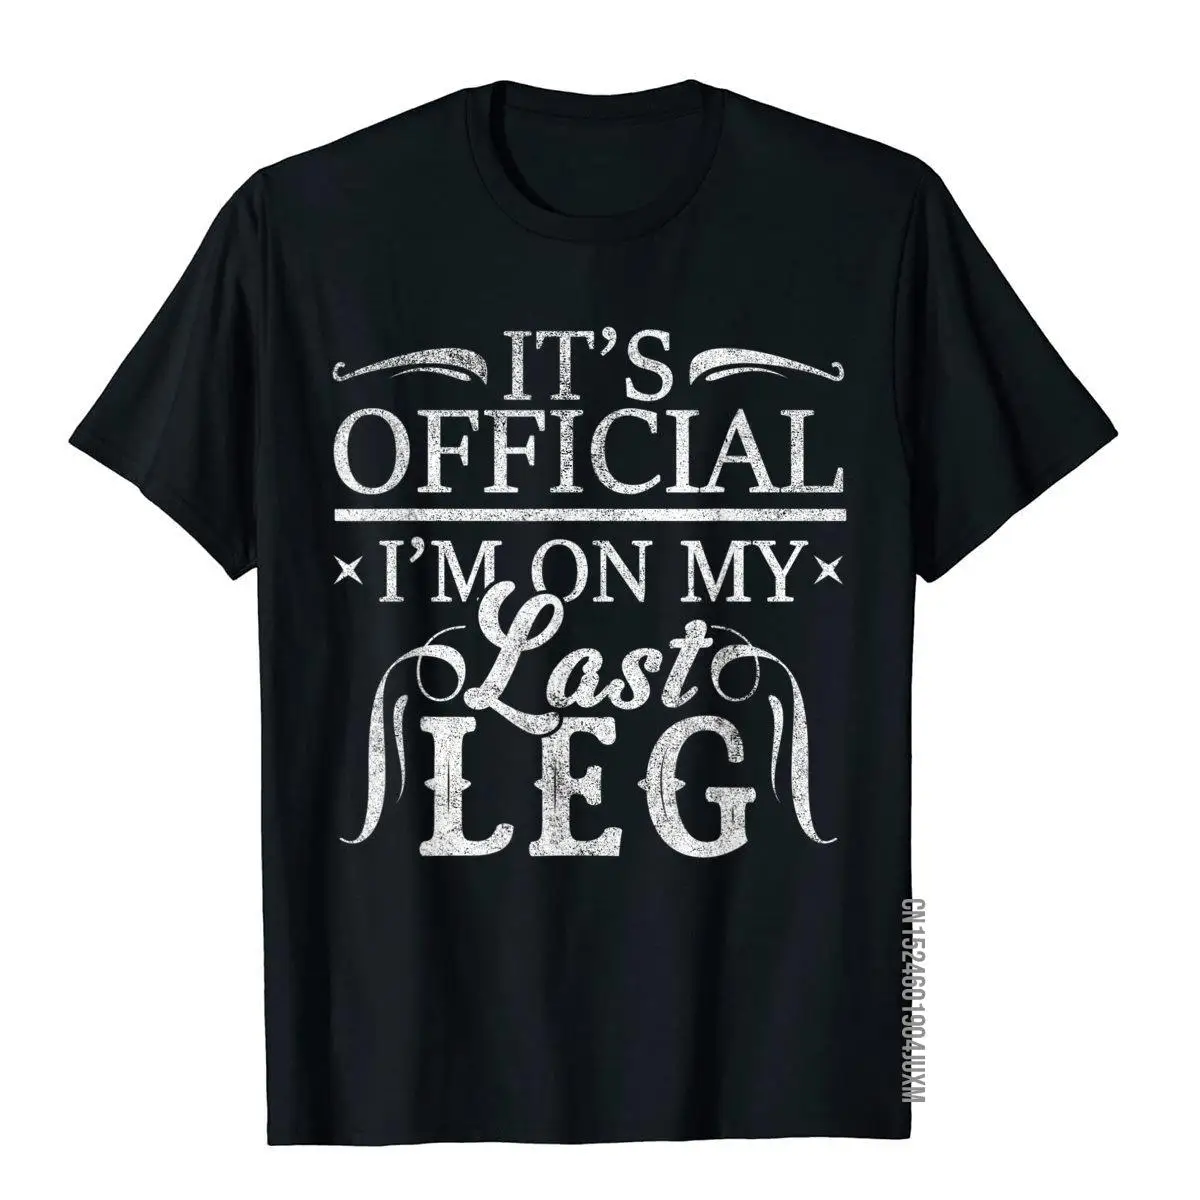 

It's Official I'm On My Last Leg Funny Amputee Humor Gift T-Shirt T Shirt For Men Group Tops T Shirt Discount Printed On Cotton